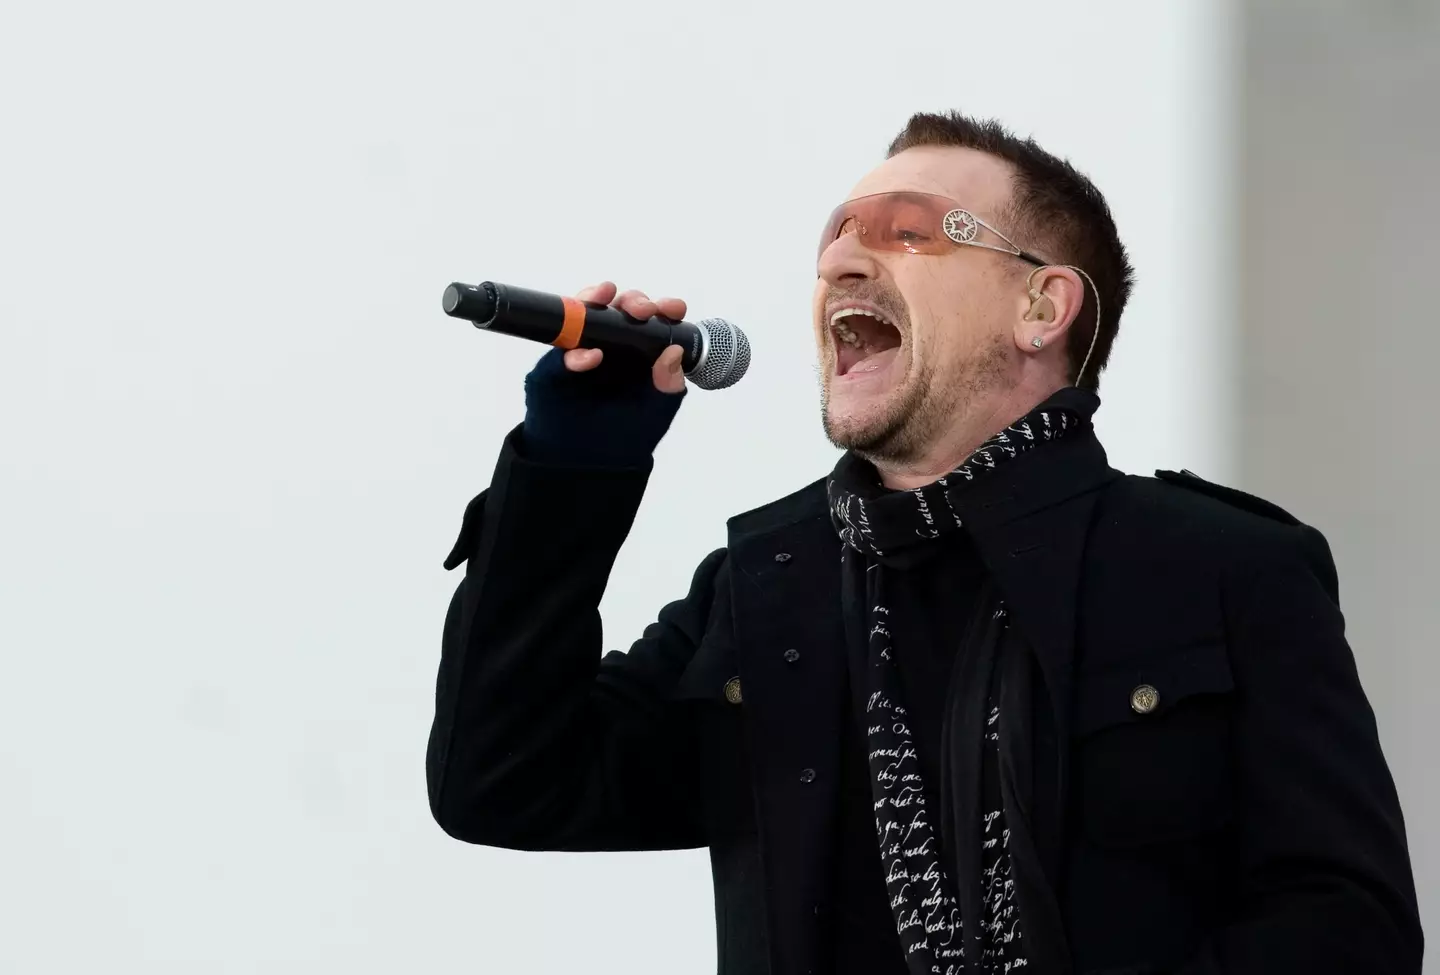 Bono's daughter initially joked about not being featured in the article.